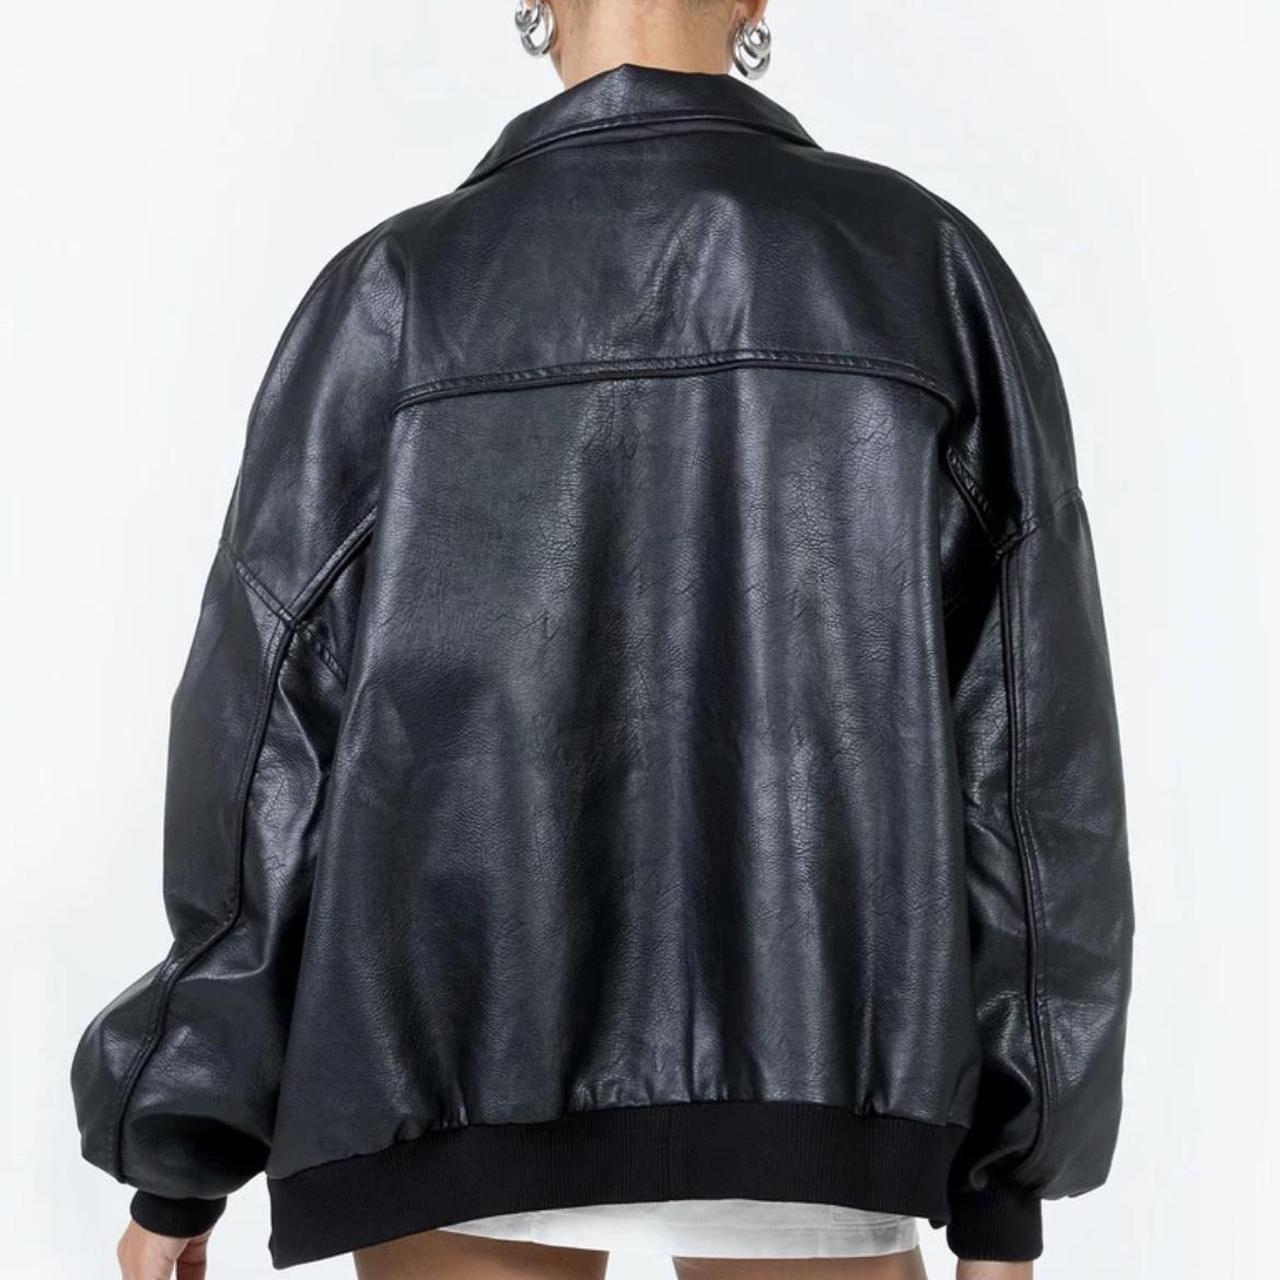 Princess Polly Goldsmith Faux Leather Bomber Jacket